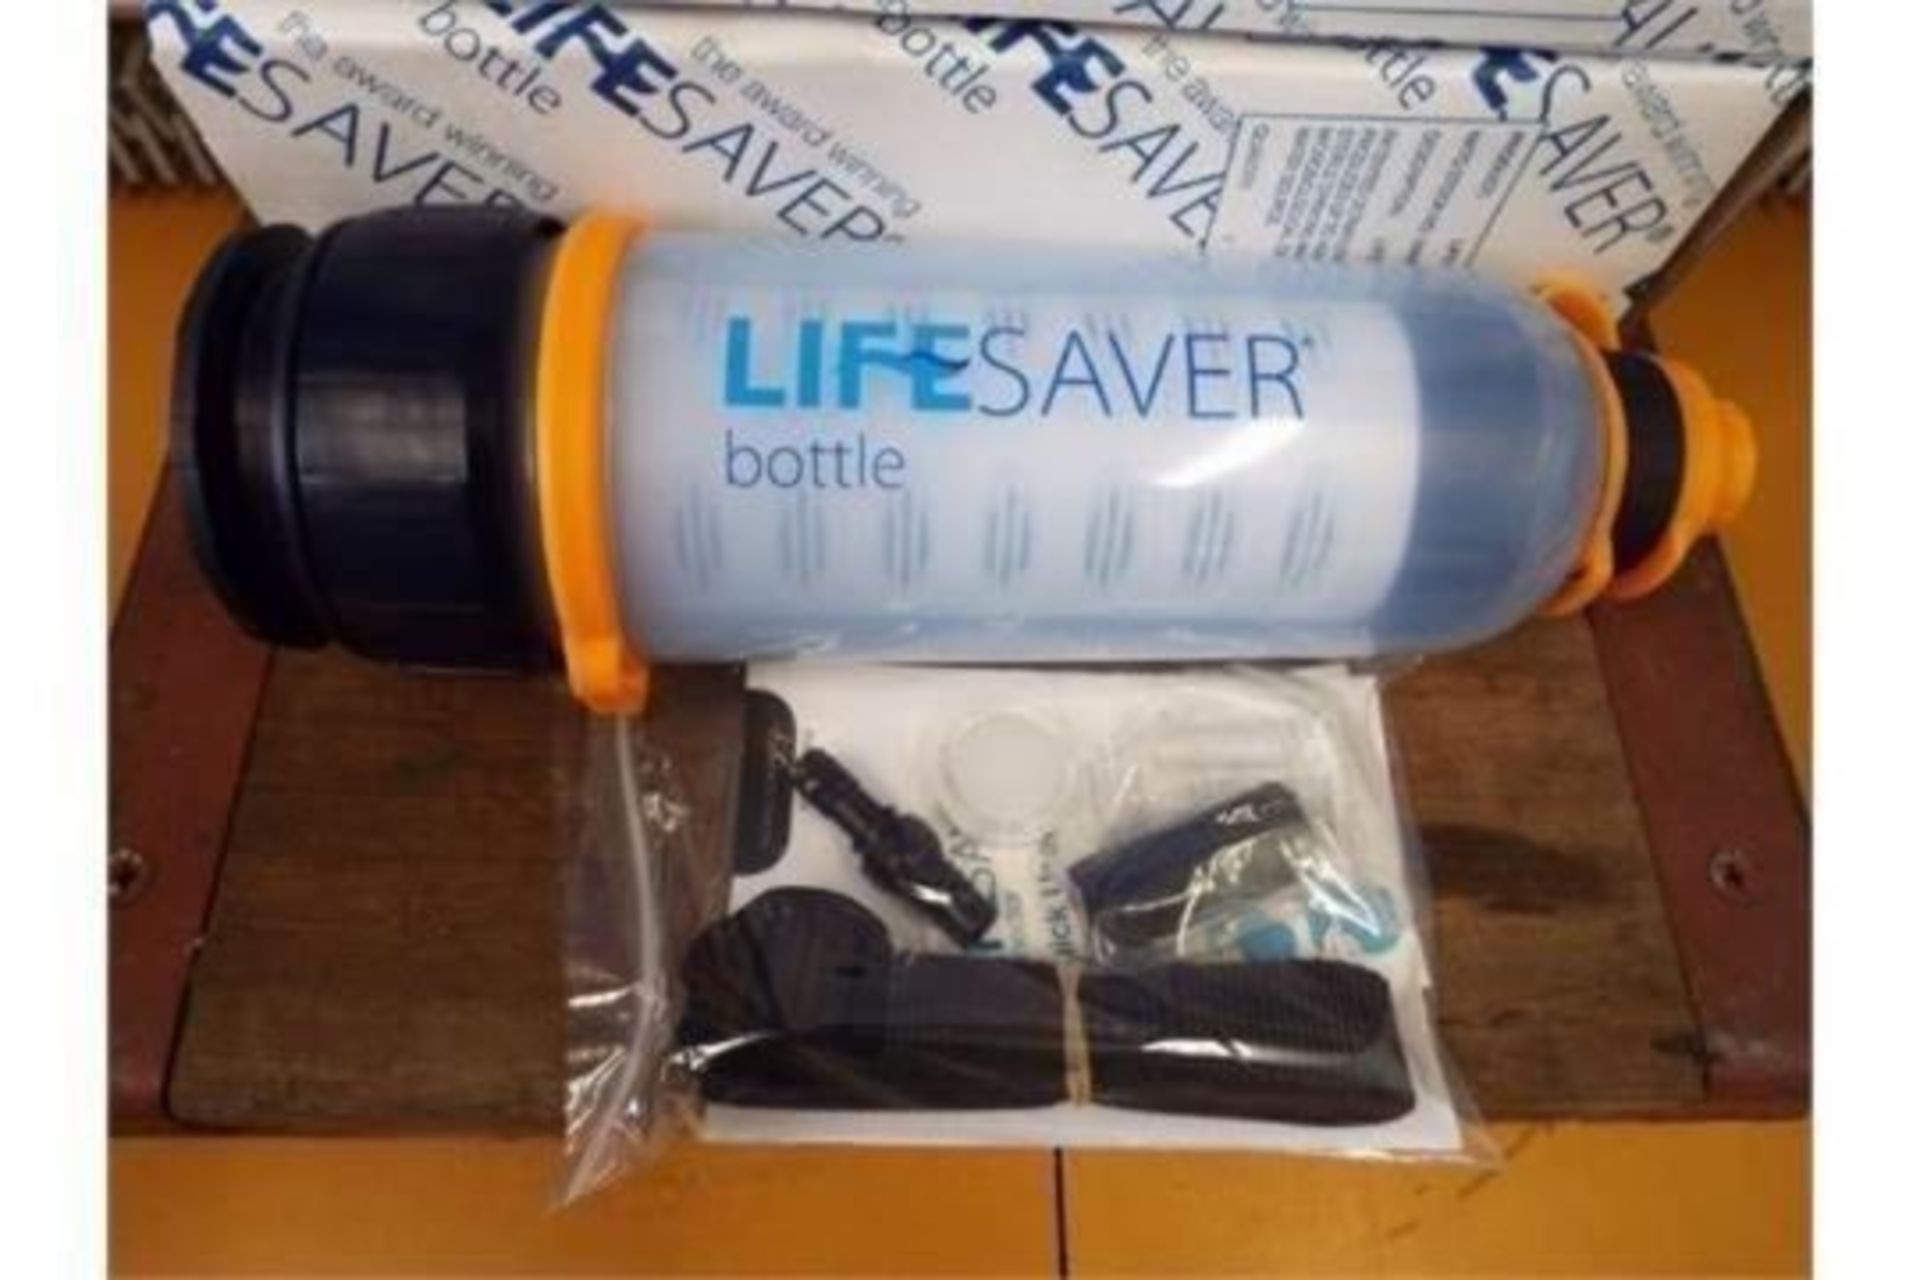 30 x Unissued Lifesaver 400UF ultra filtration water bottles, with storage box - Image 3 of 8